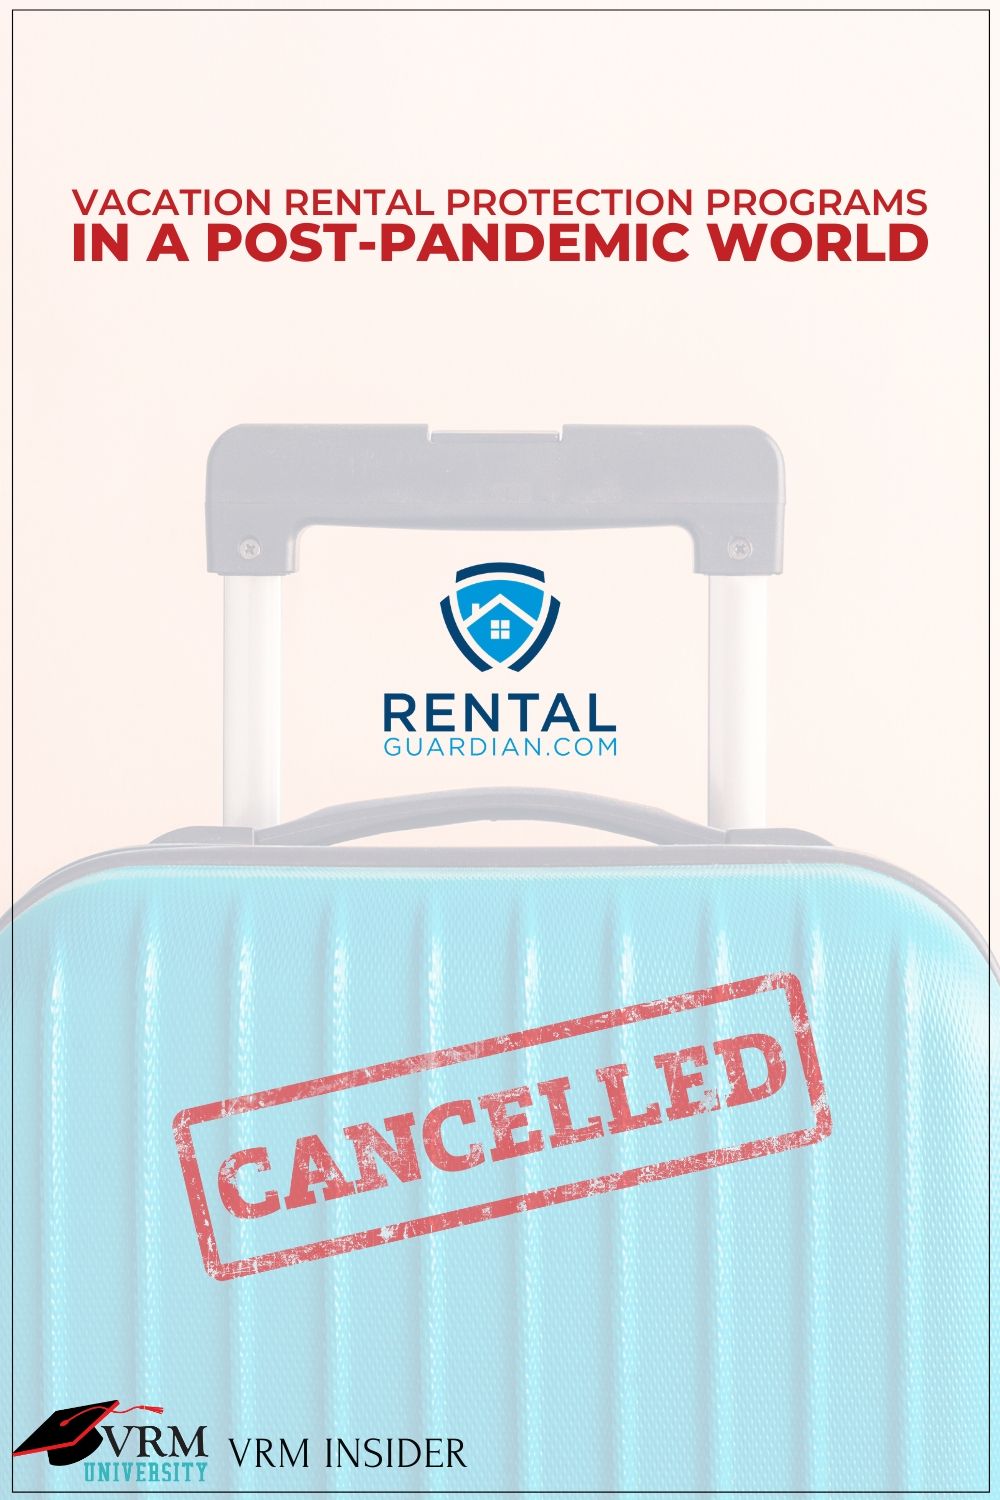  VRM Insider, Vacation Rental Protection Programs in a Post Pandemic World